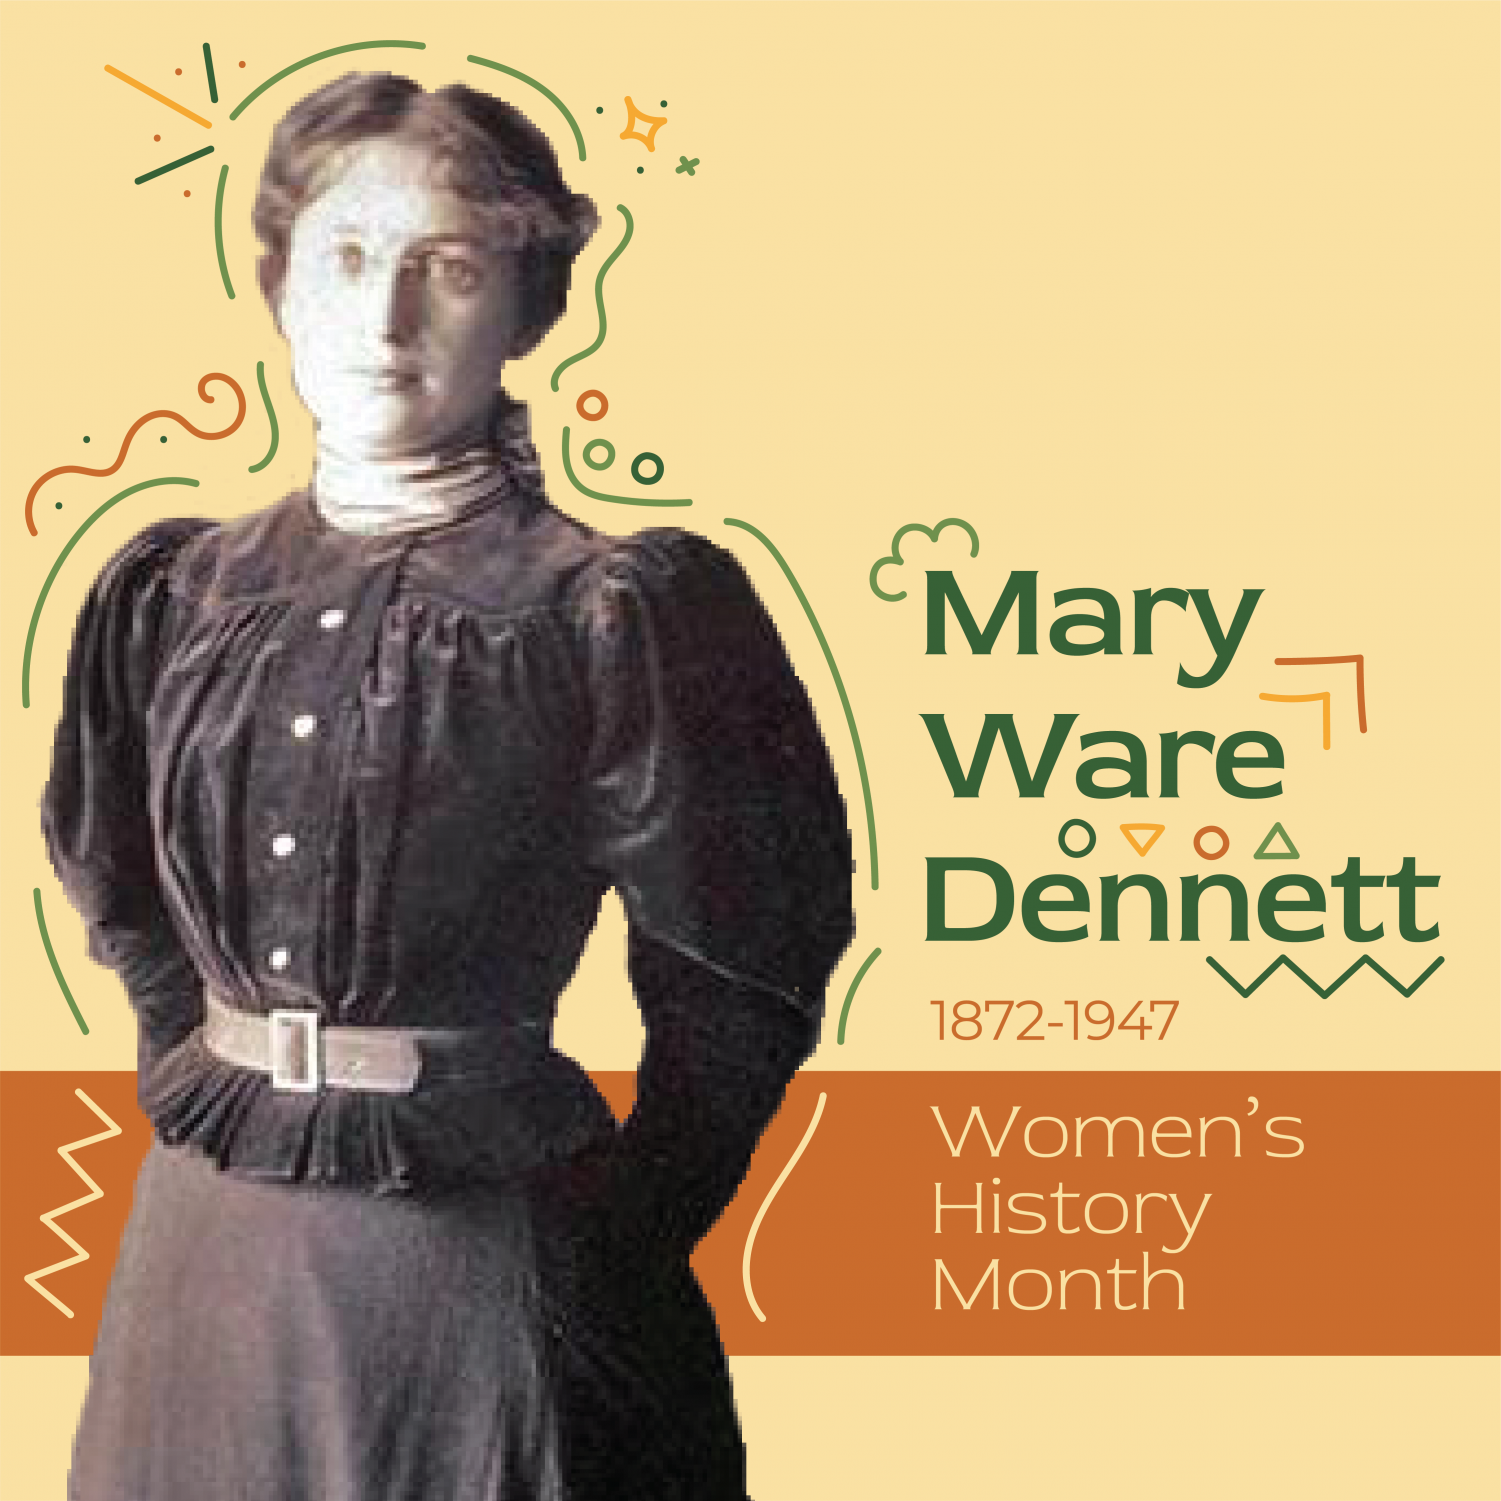 Womens+History+Month%3A+Mary+Ware+Dennett